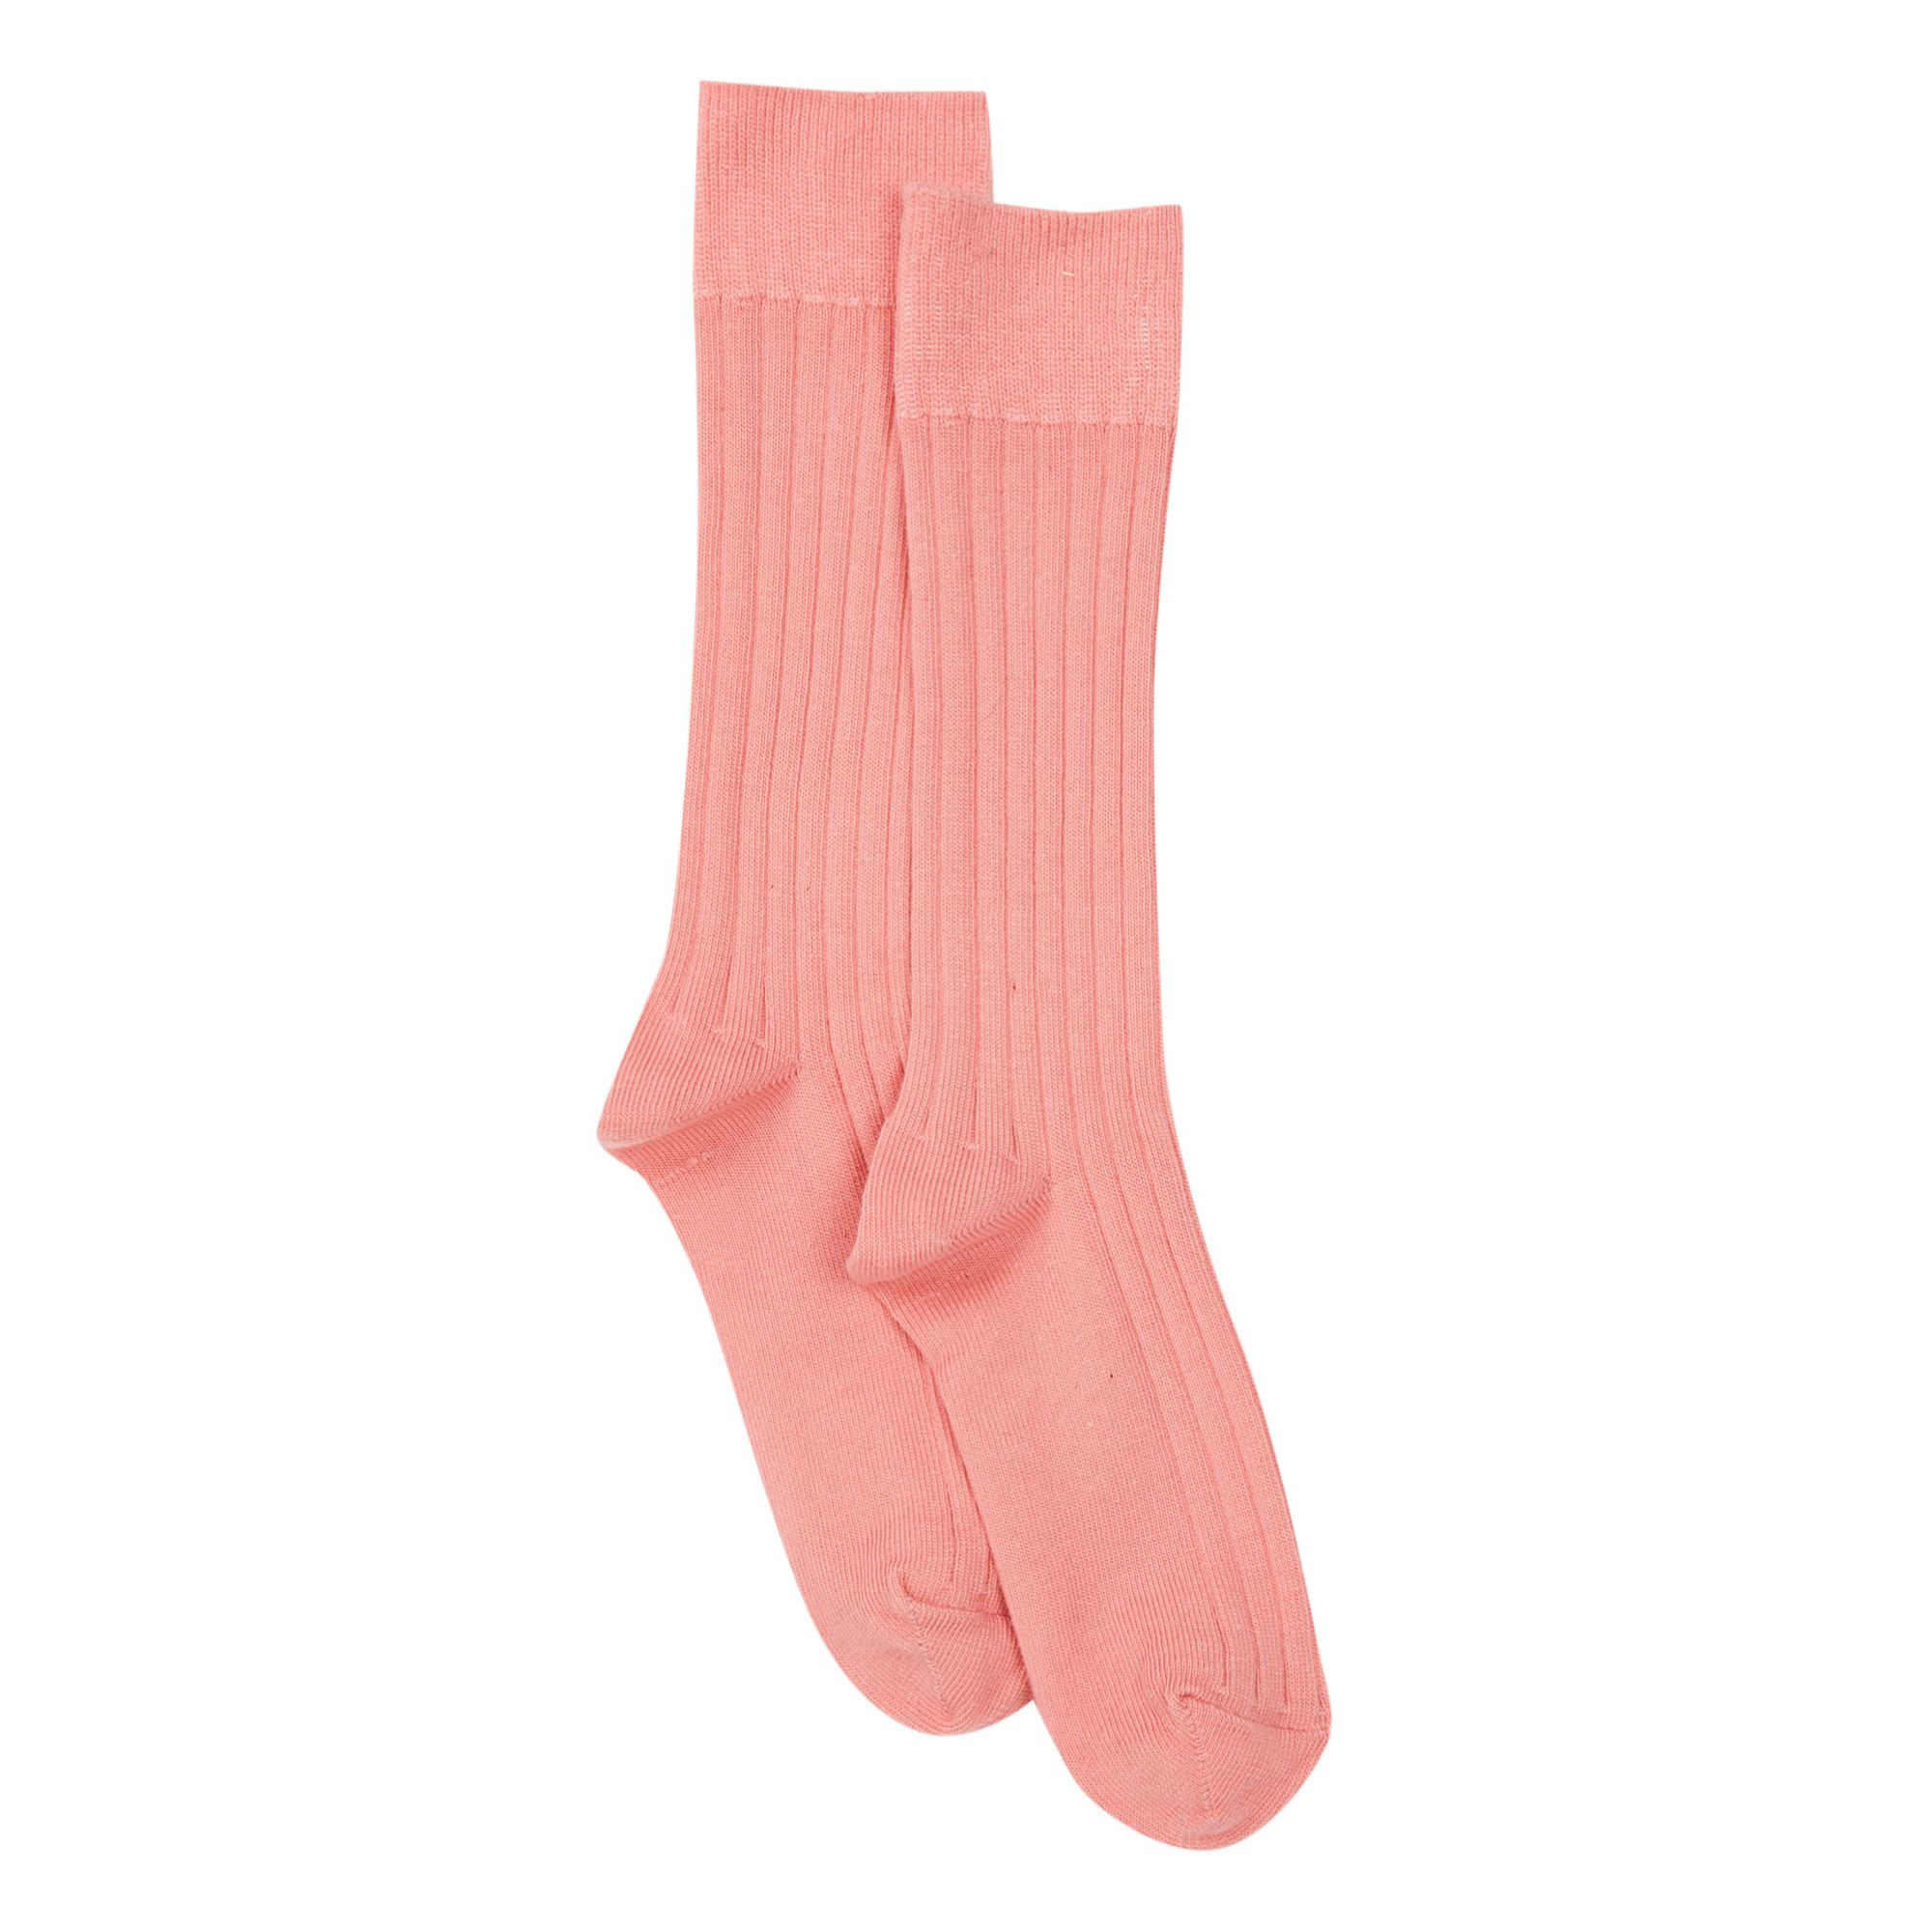 MAAN - Chaussettes - Fille - Corail